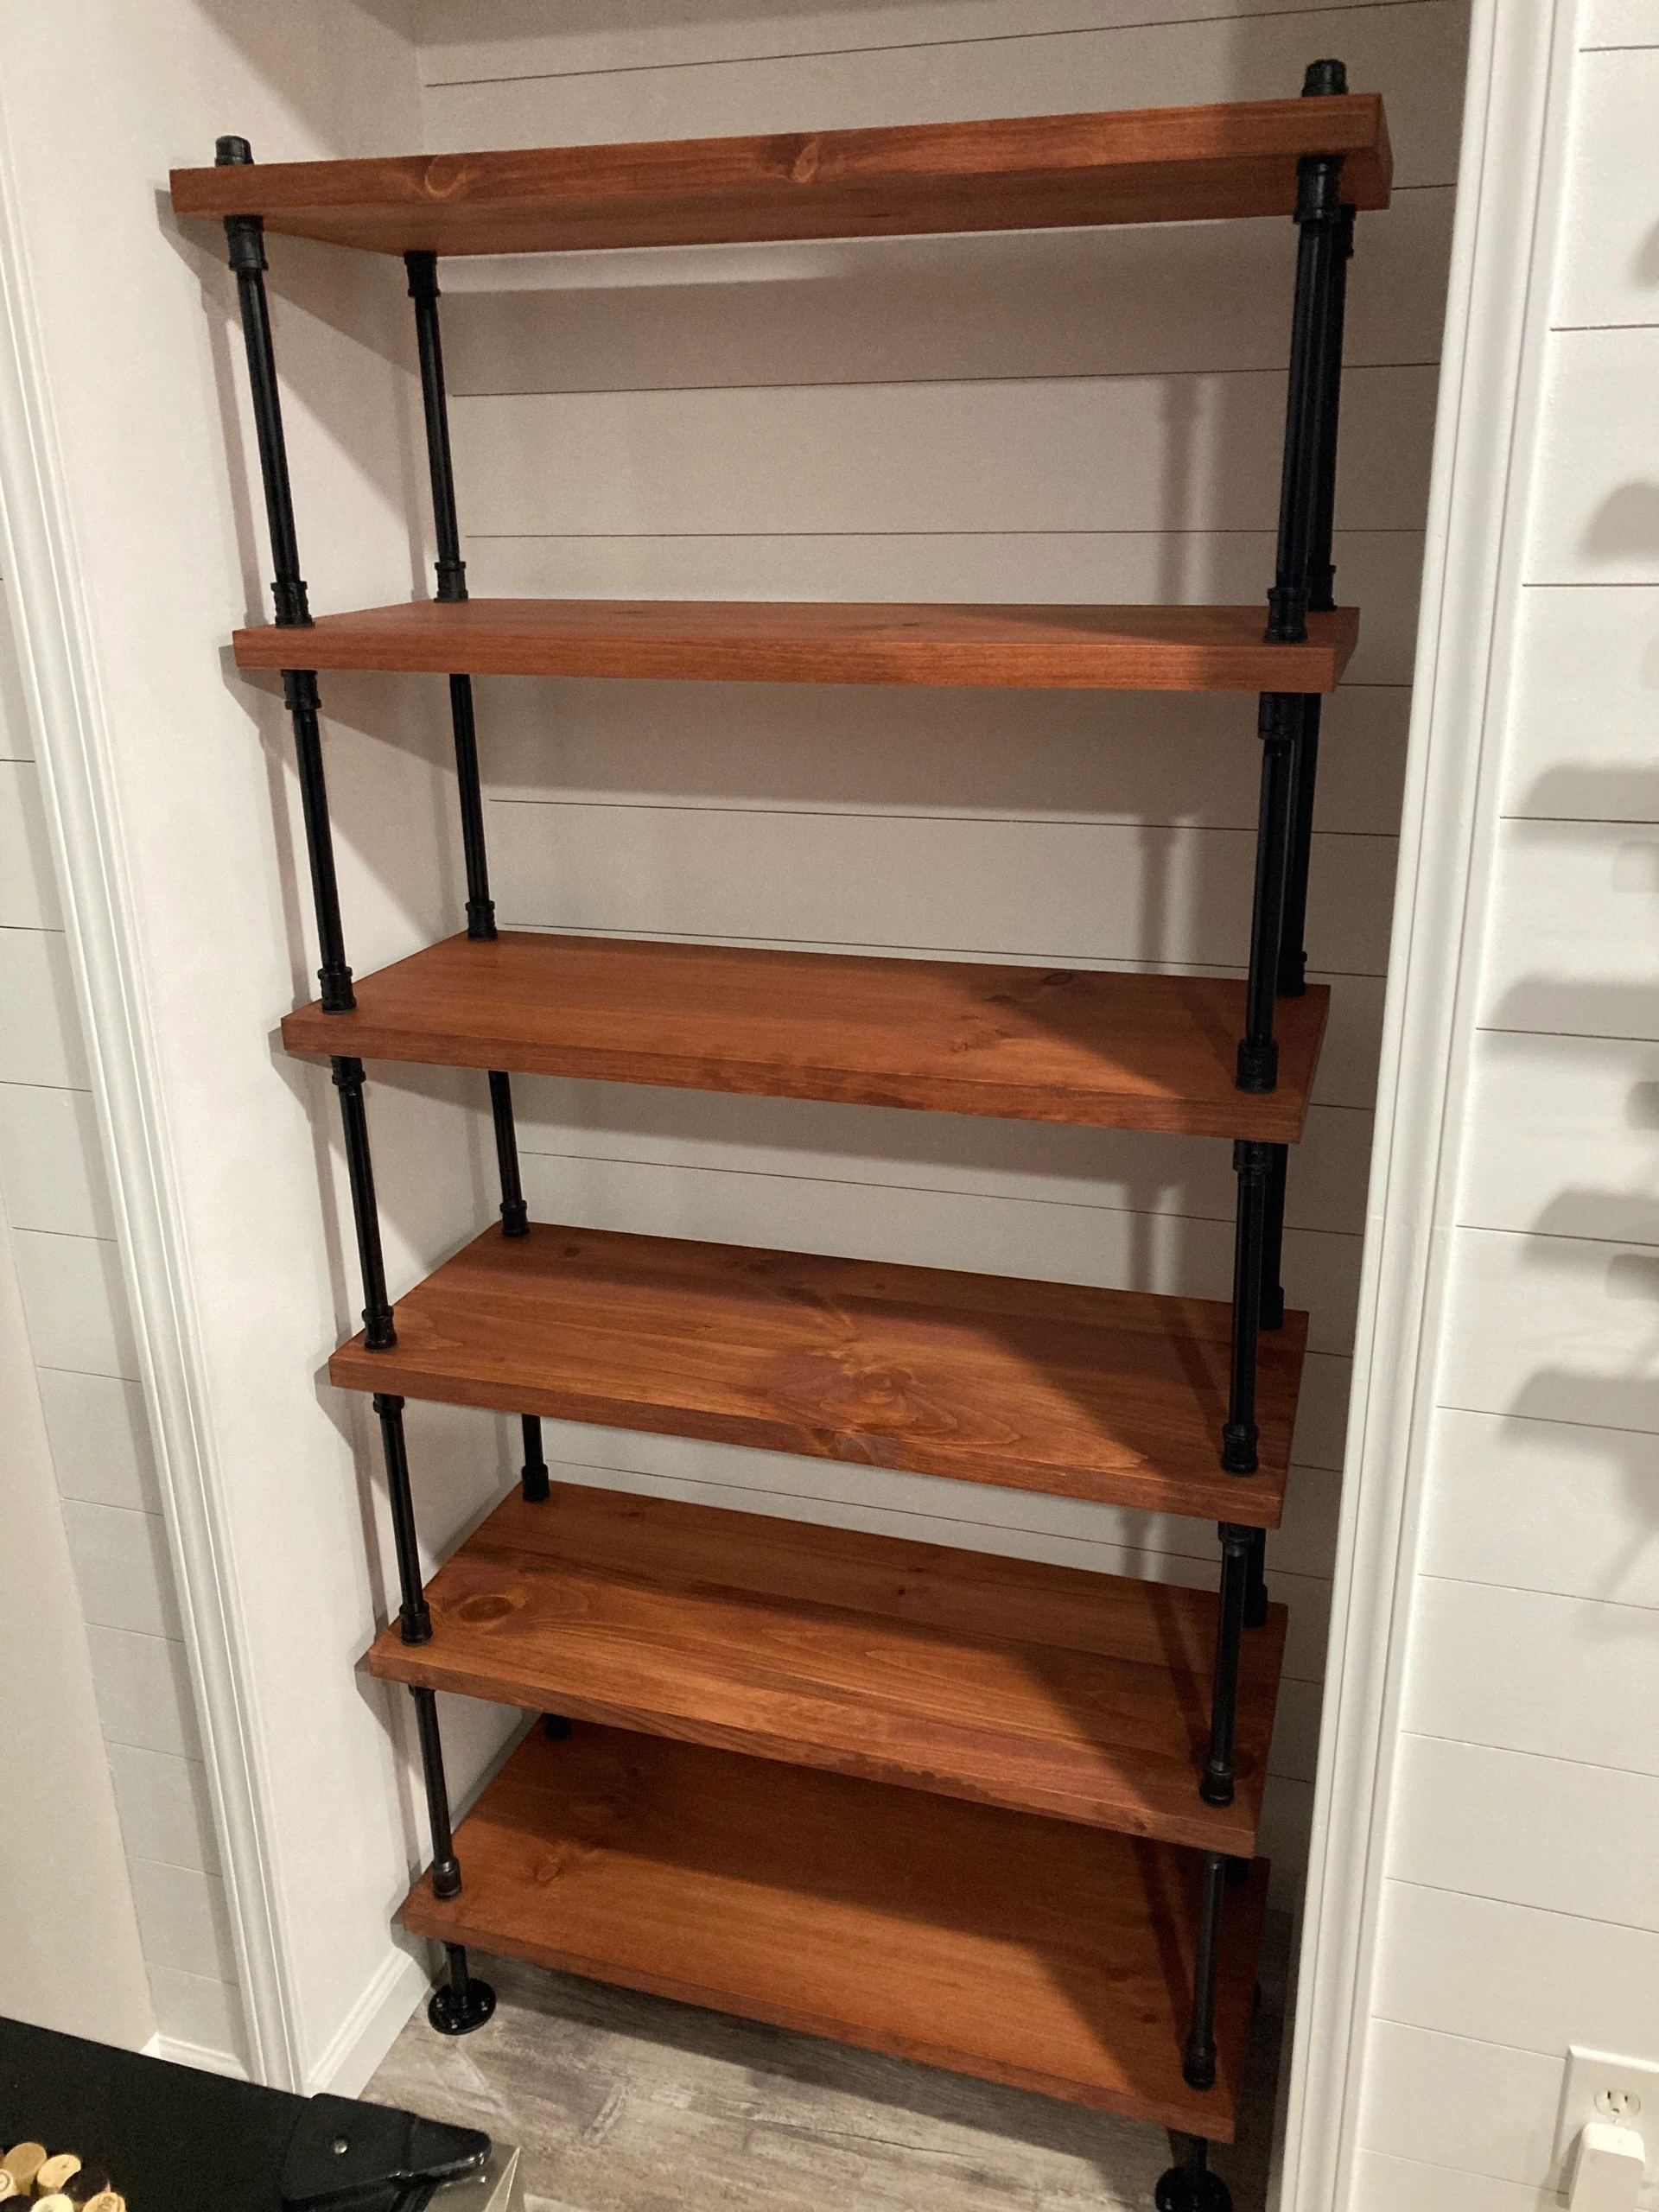 Bookcase sits in pantry kitchen nook with white walls. Bookcase is solid wood with balck iron pipe etagere frame. Shelves are solid pine wood finished with gunstock Minwax stain. Shelves are 36 inches length by 14 inches deep. Handmade bookcase by JT INDUSTRIAL DESIGNS in Texas.